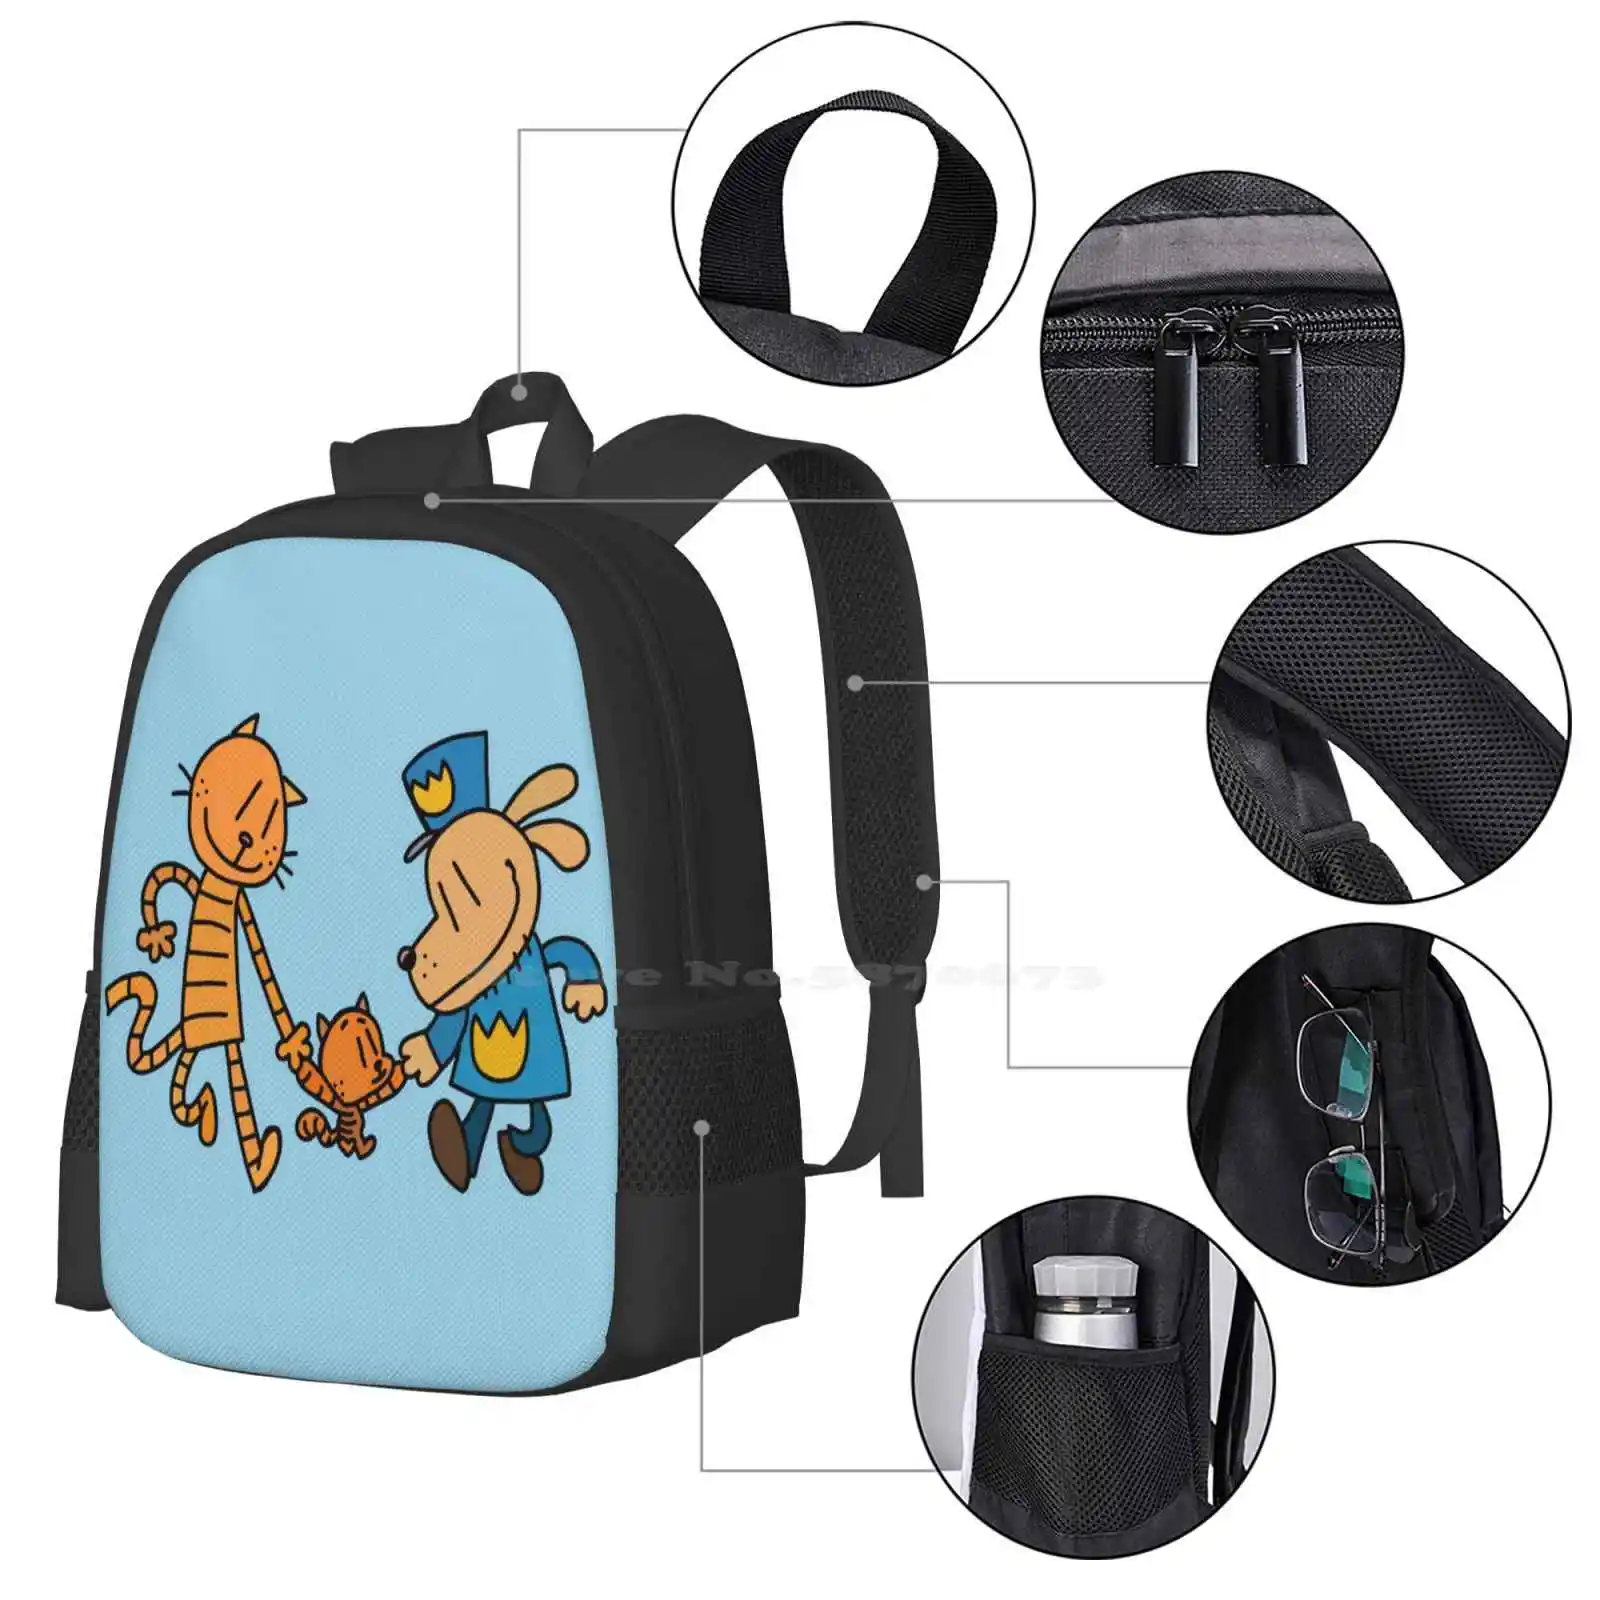 Dog Man , Lil Petey , And Big Petey Fan Art School Bags For Teenage Girls Laptop Travel Bags Pilkey Captain Underpants Graphic